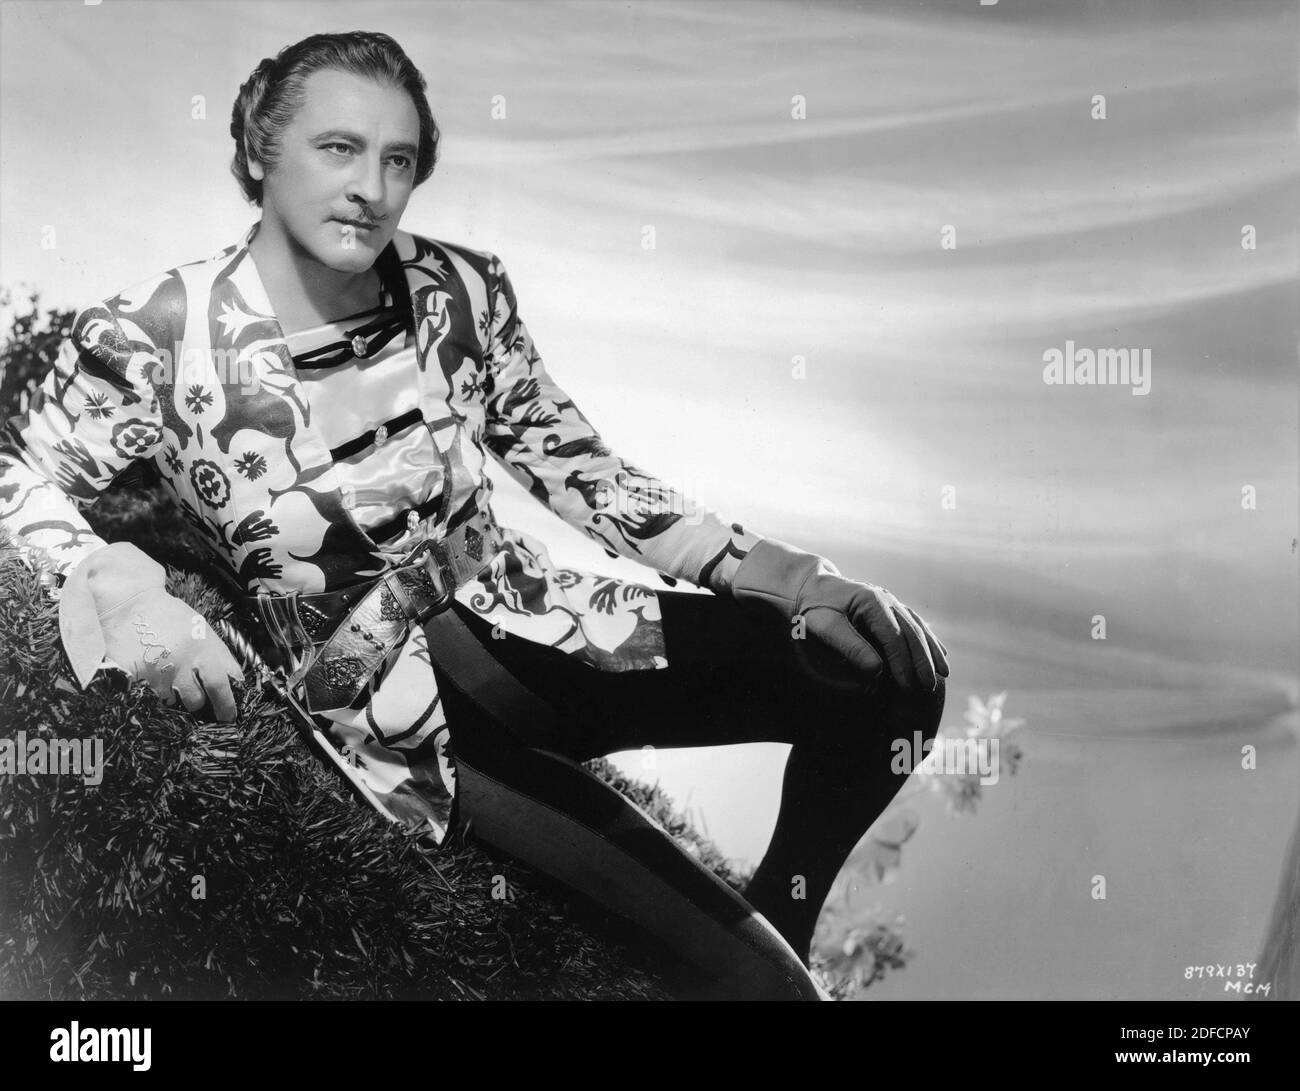 Oliver irving Black and White Stock Photos & Images - Alamy